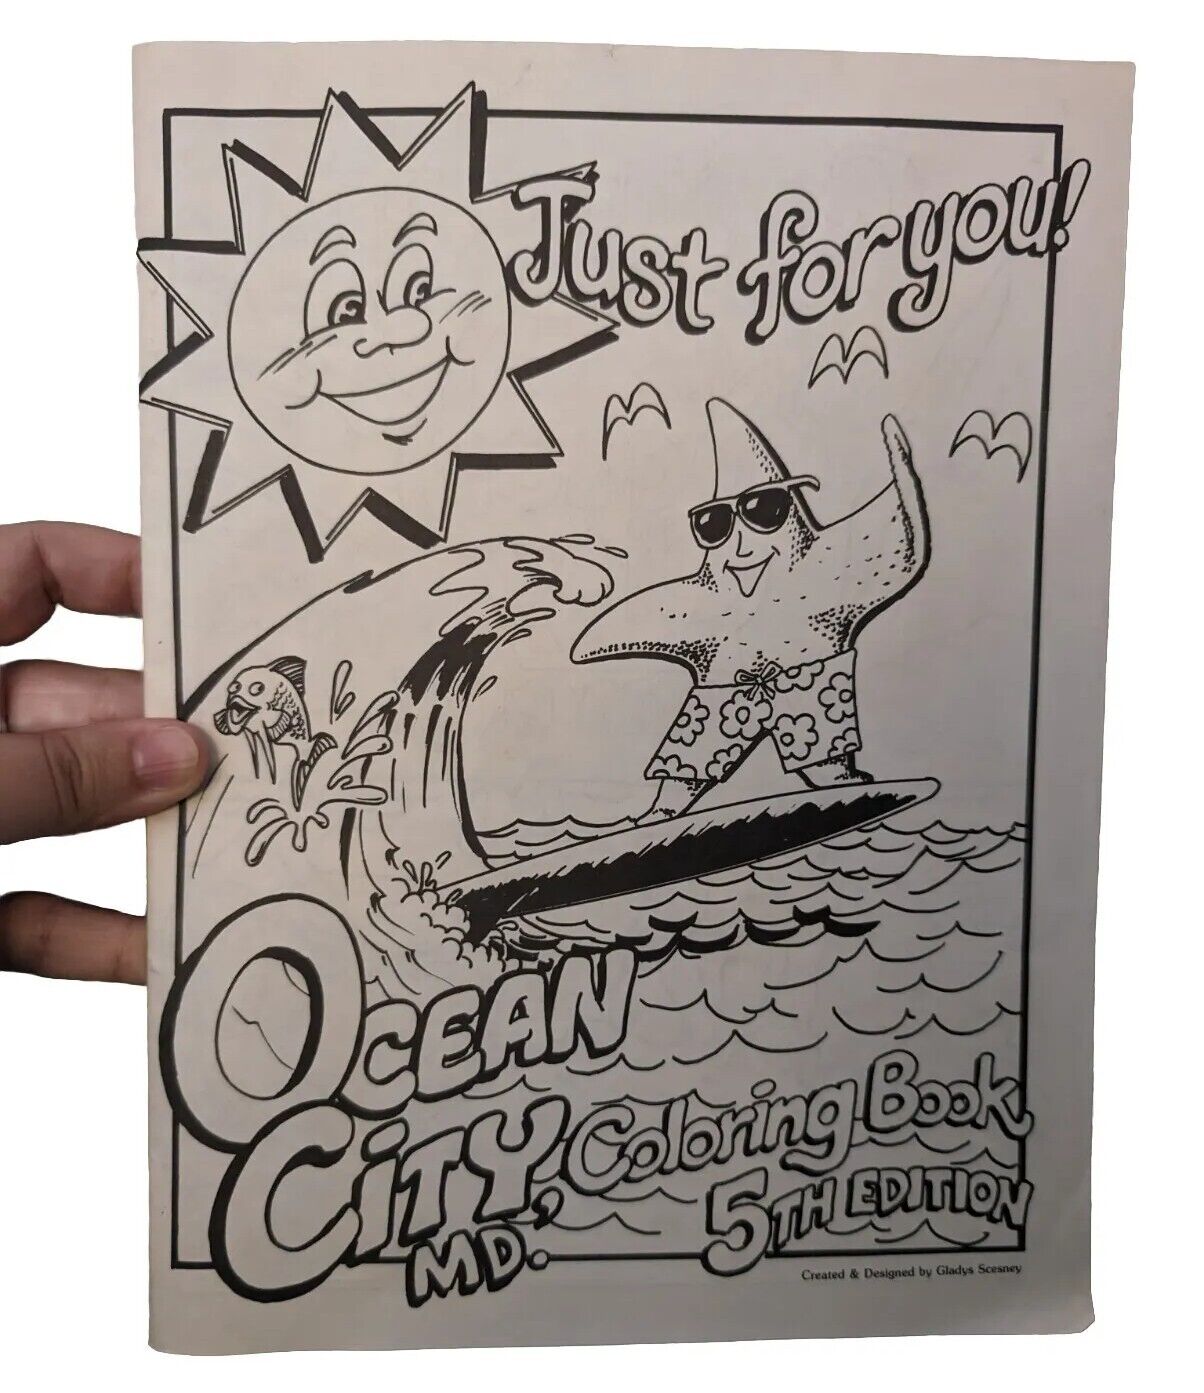 VTG 1985 Ocean City, MD Coloring Book 5th Ed. Beach Just For You Gladys Scesney